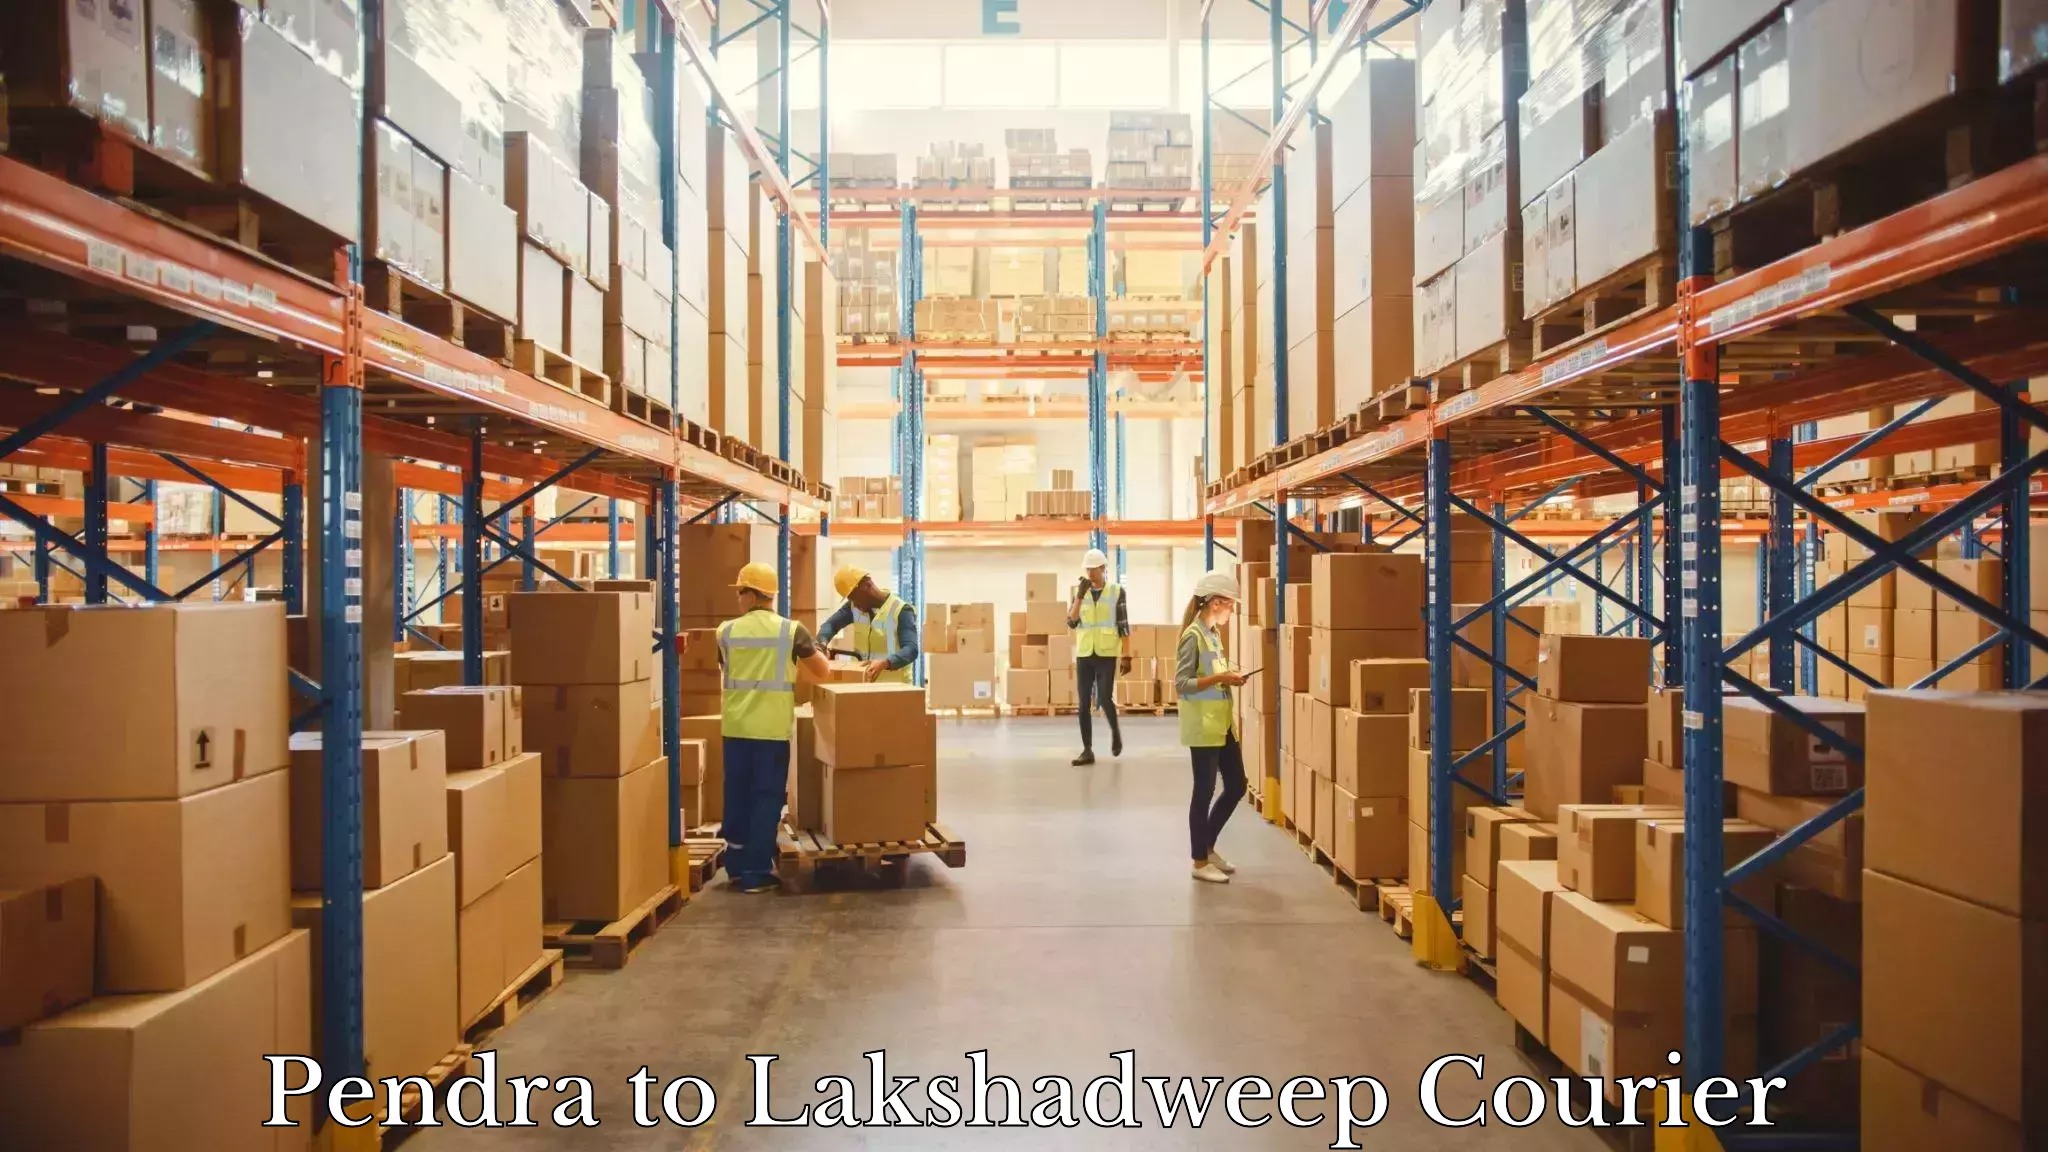 Advanced courier platforms in Pendra to Lakshadweep